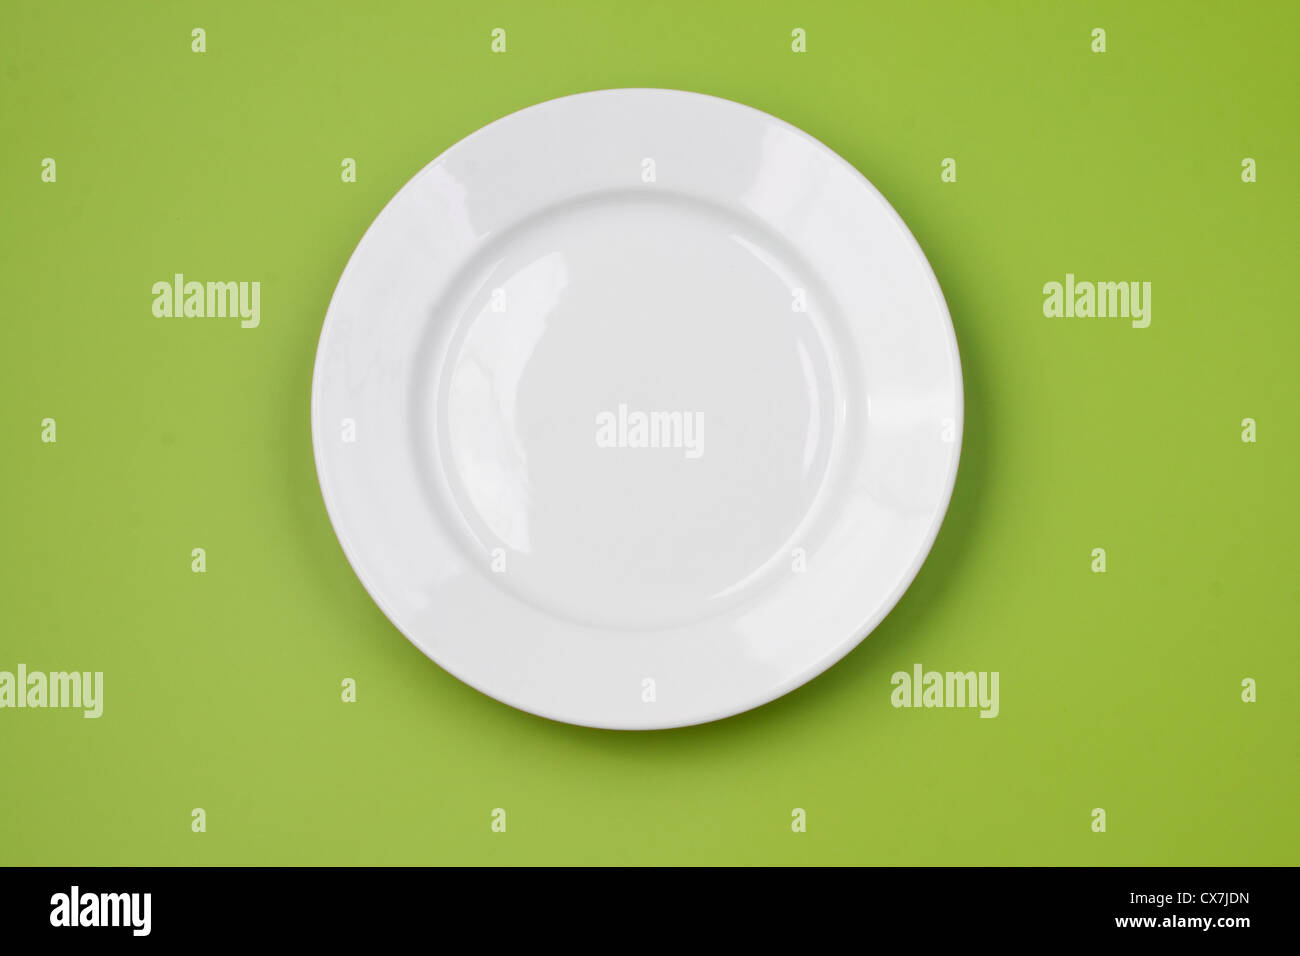 White round plate on green background Stock Photo